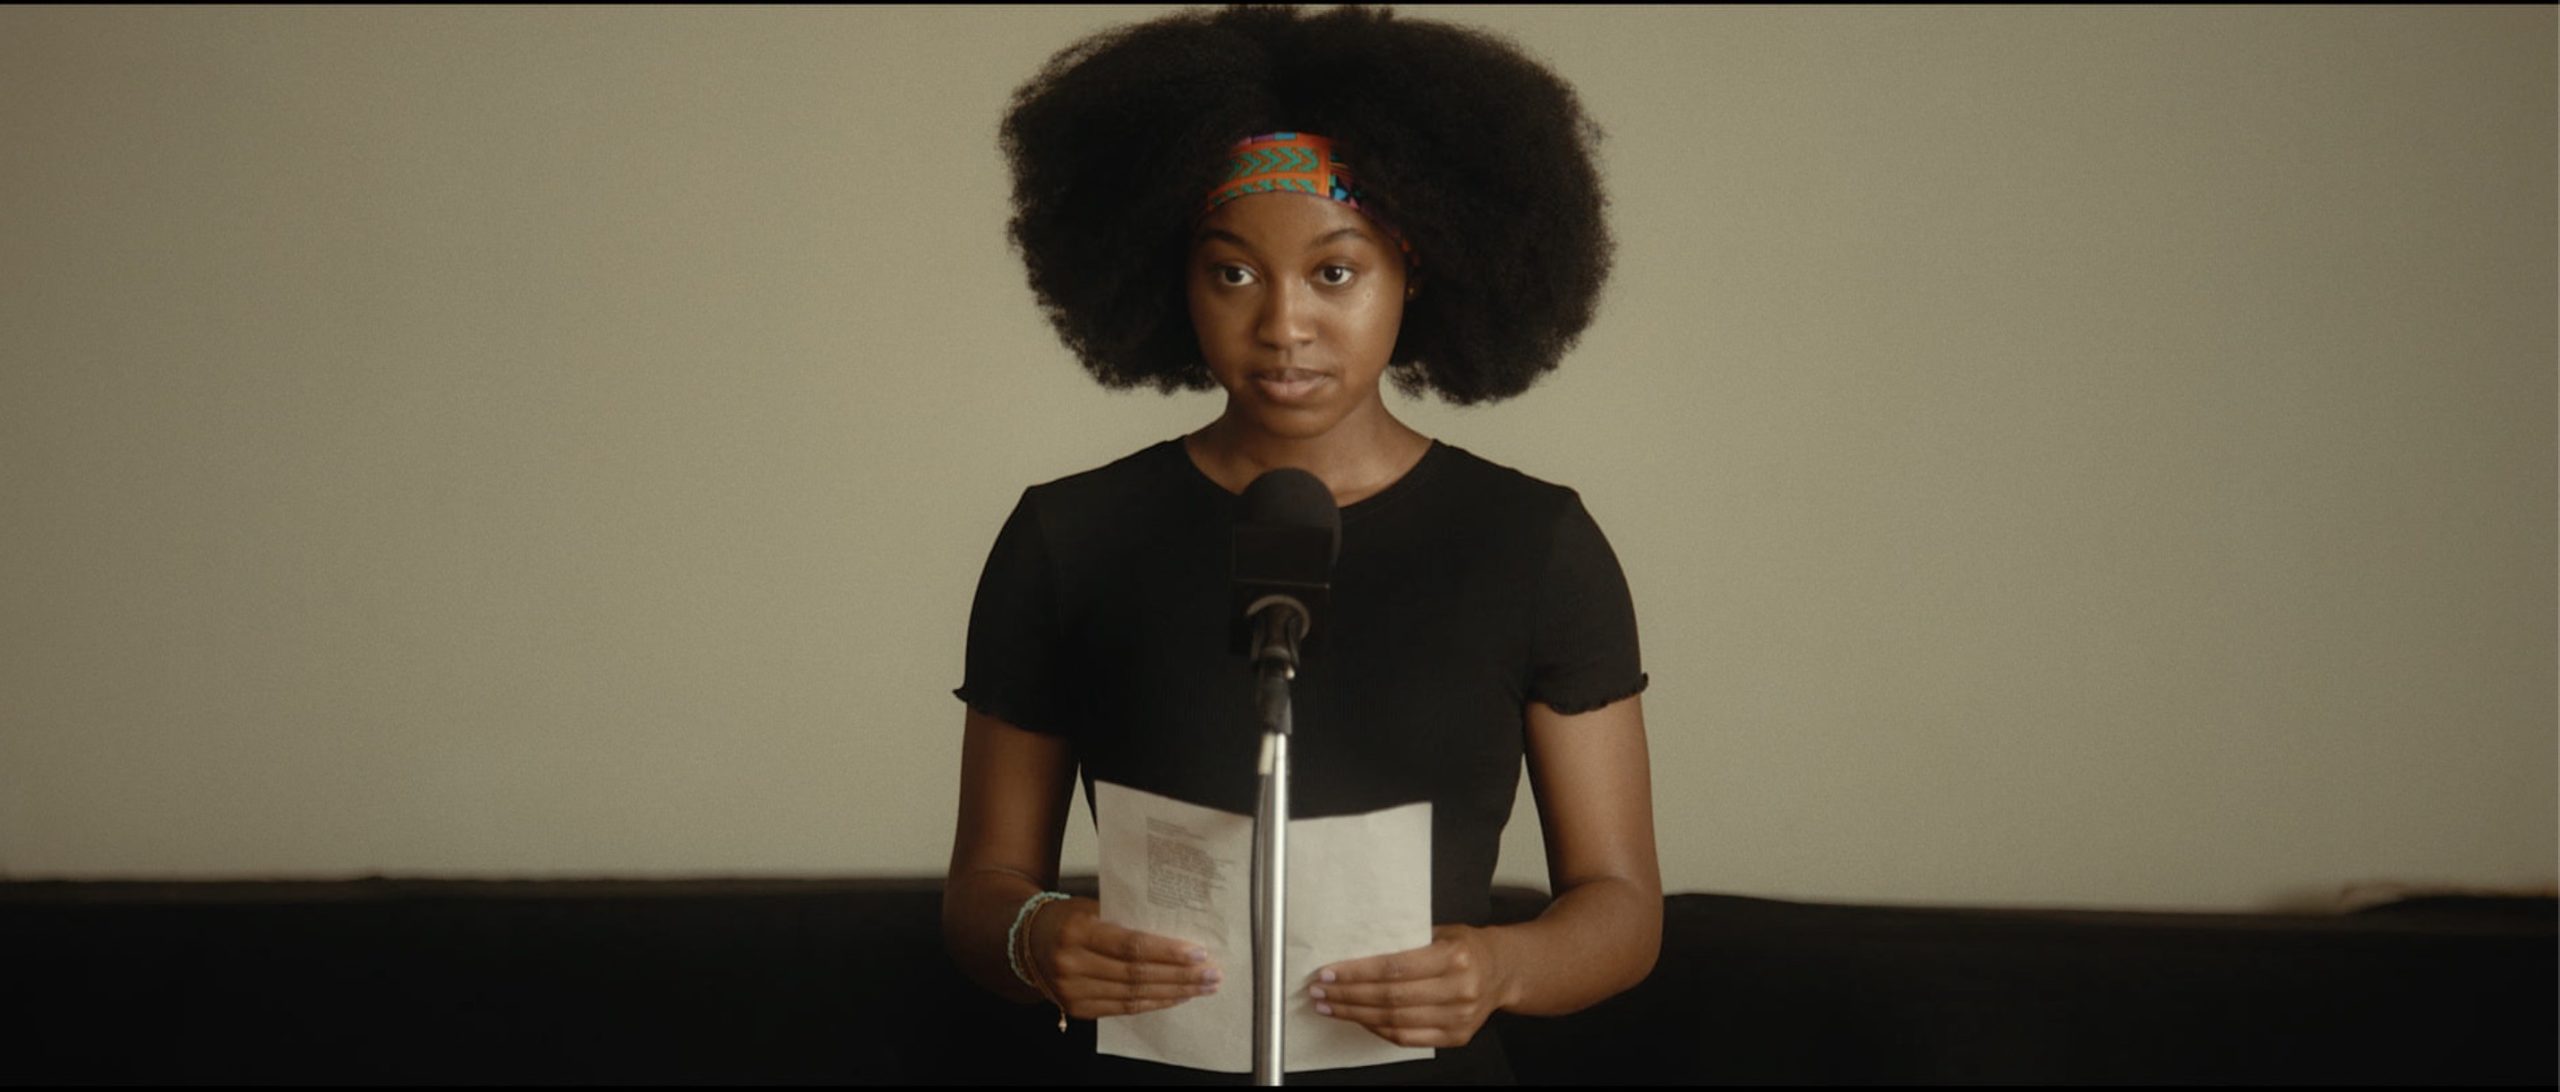 Kai stands in front of a microphone, holding a sheet of paper. She wears a black T-shirt and a headband, and wears her hair as an afro.